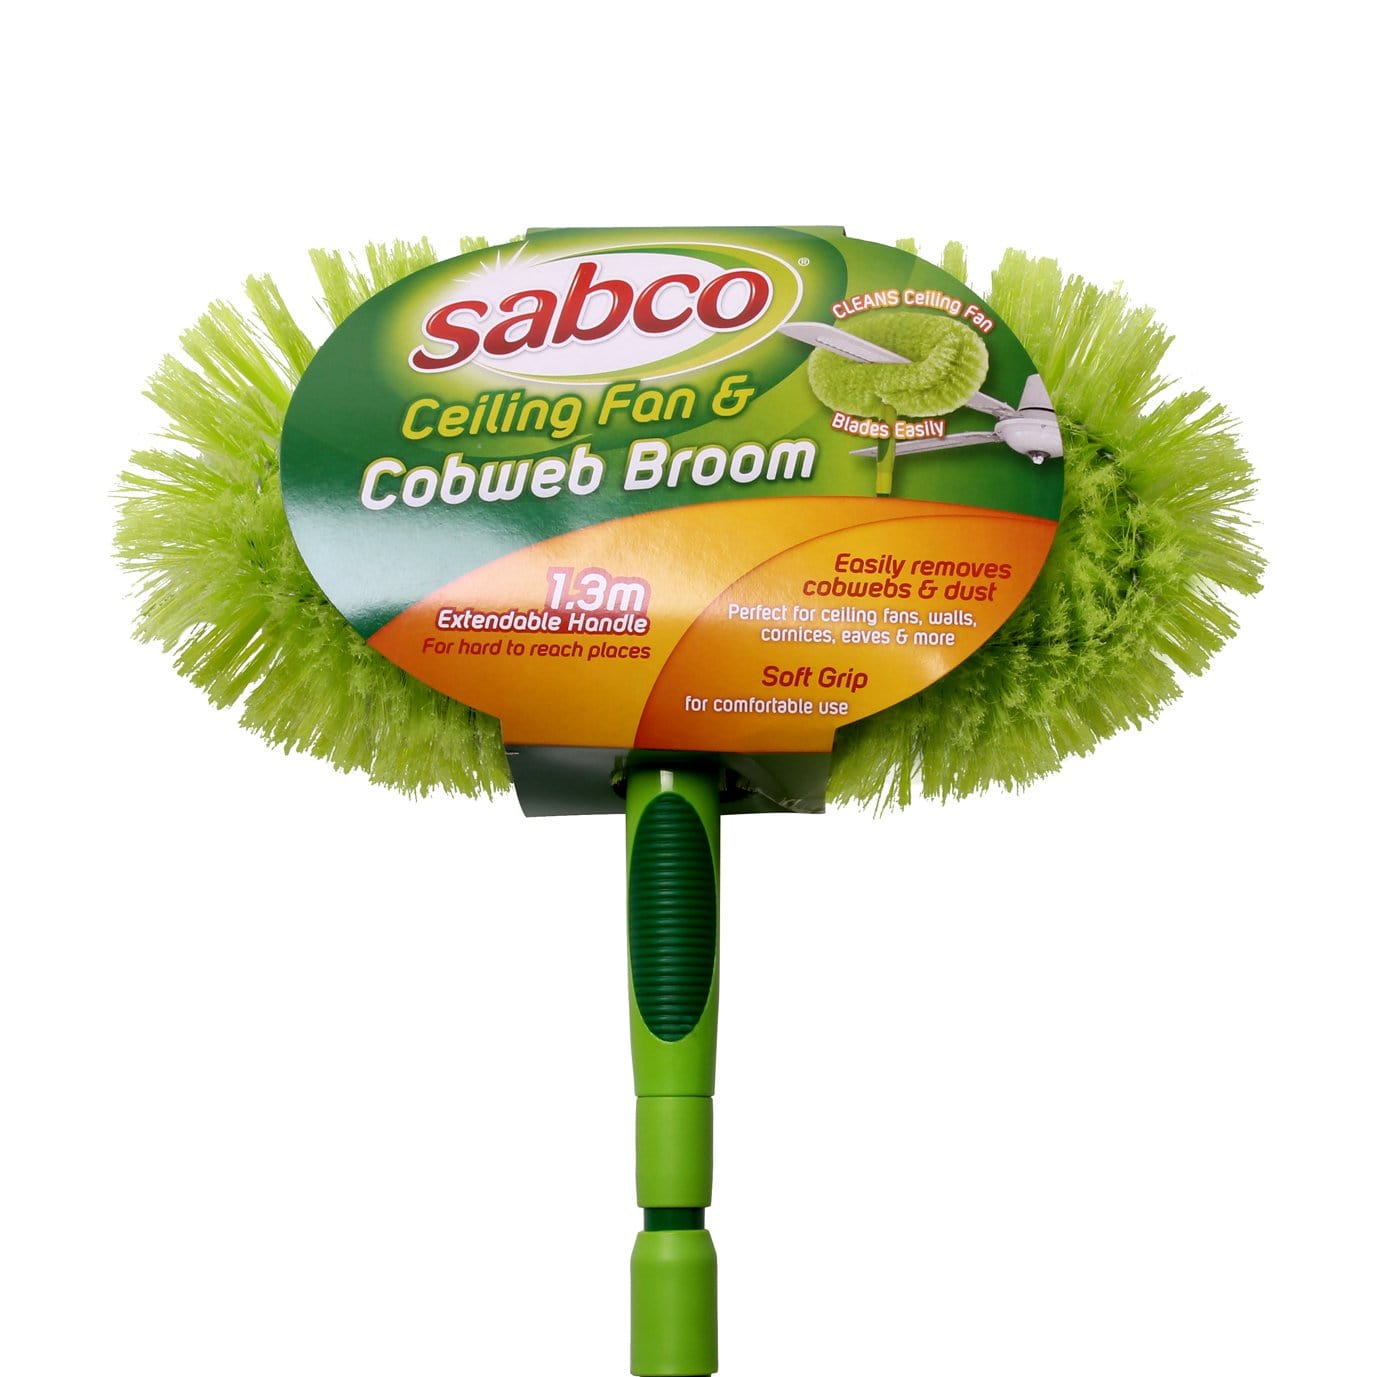 Sabco | Ceiling Fan & Cob Web Broom | Crystalwhite Cleaning Supplies Melbourne